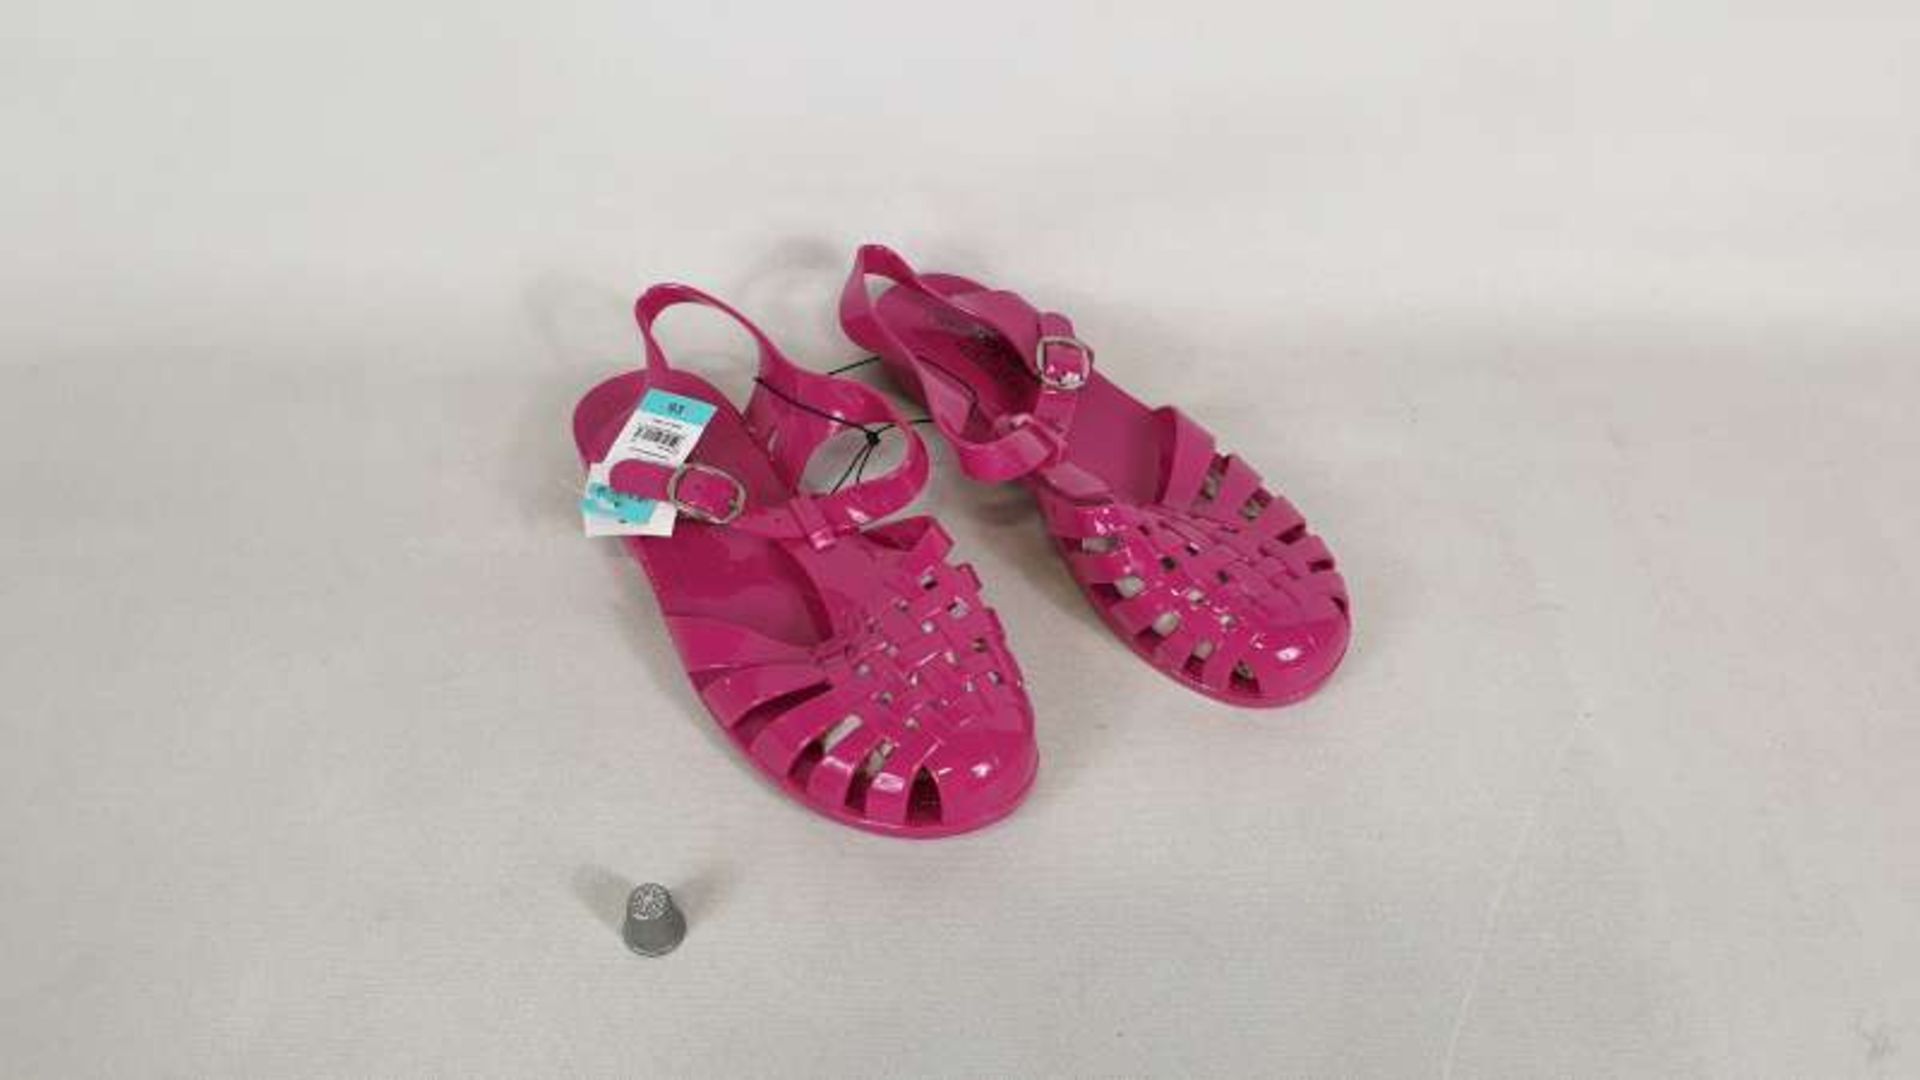 APPROX 80 X BRAND NEW PINK JELLY SANDALS IN 2 BOXES